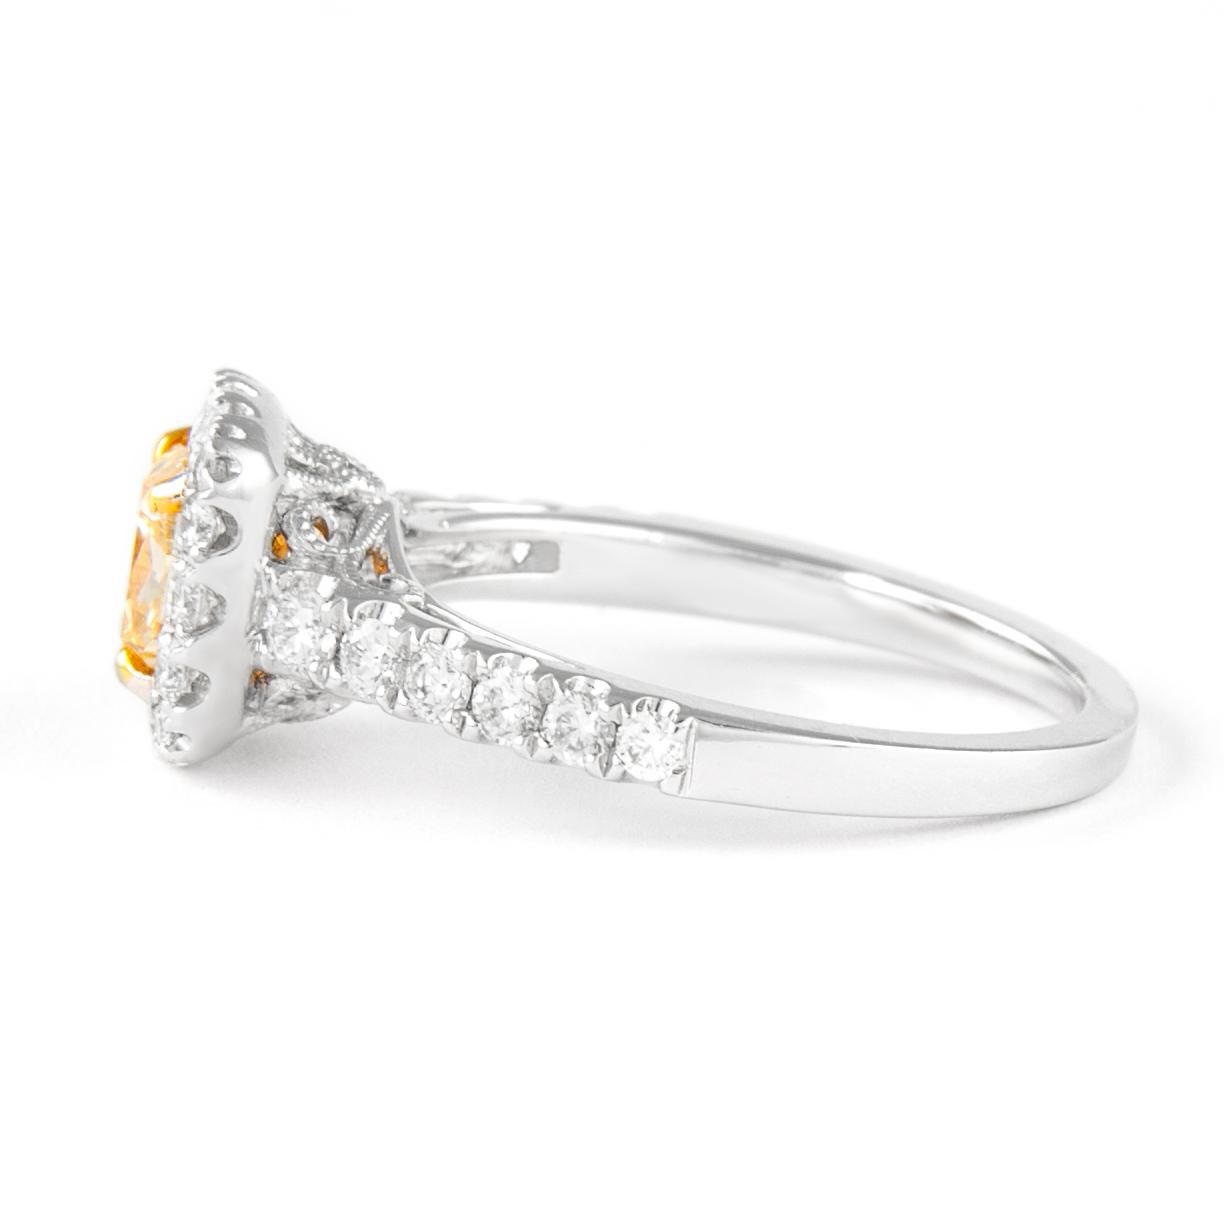 Cushion Cut Alexander 1.02ct Fancy Intense Yellow Cushion Diamond with Halo Ring 18k For Sale